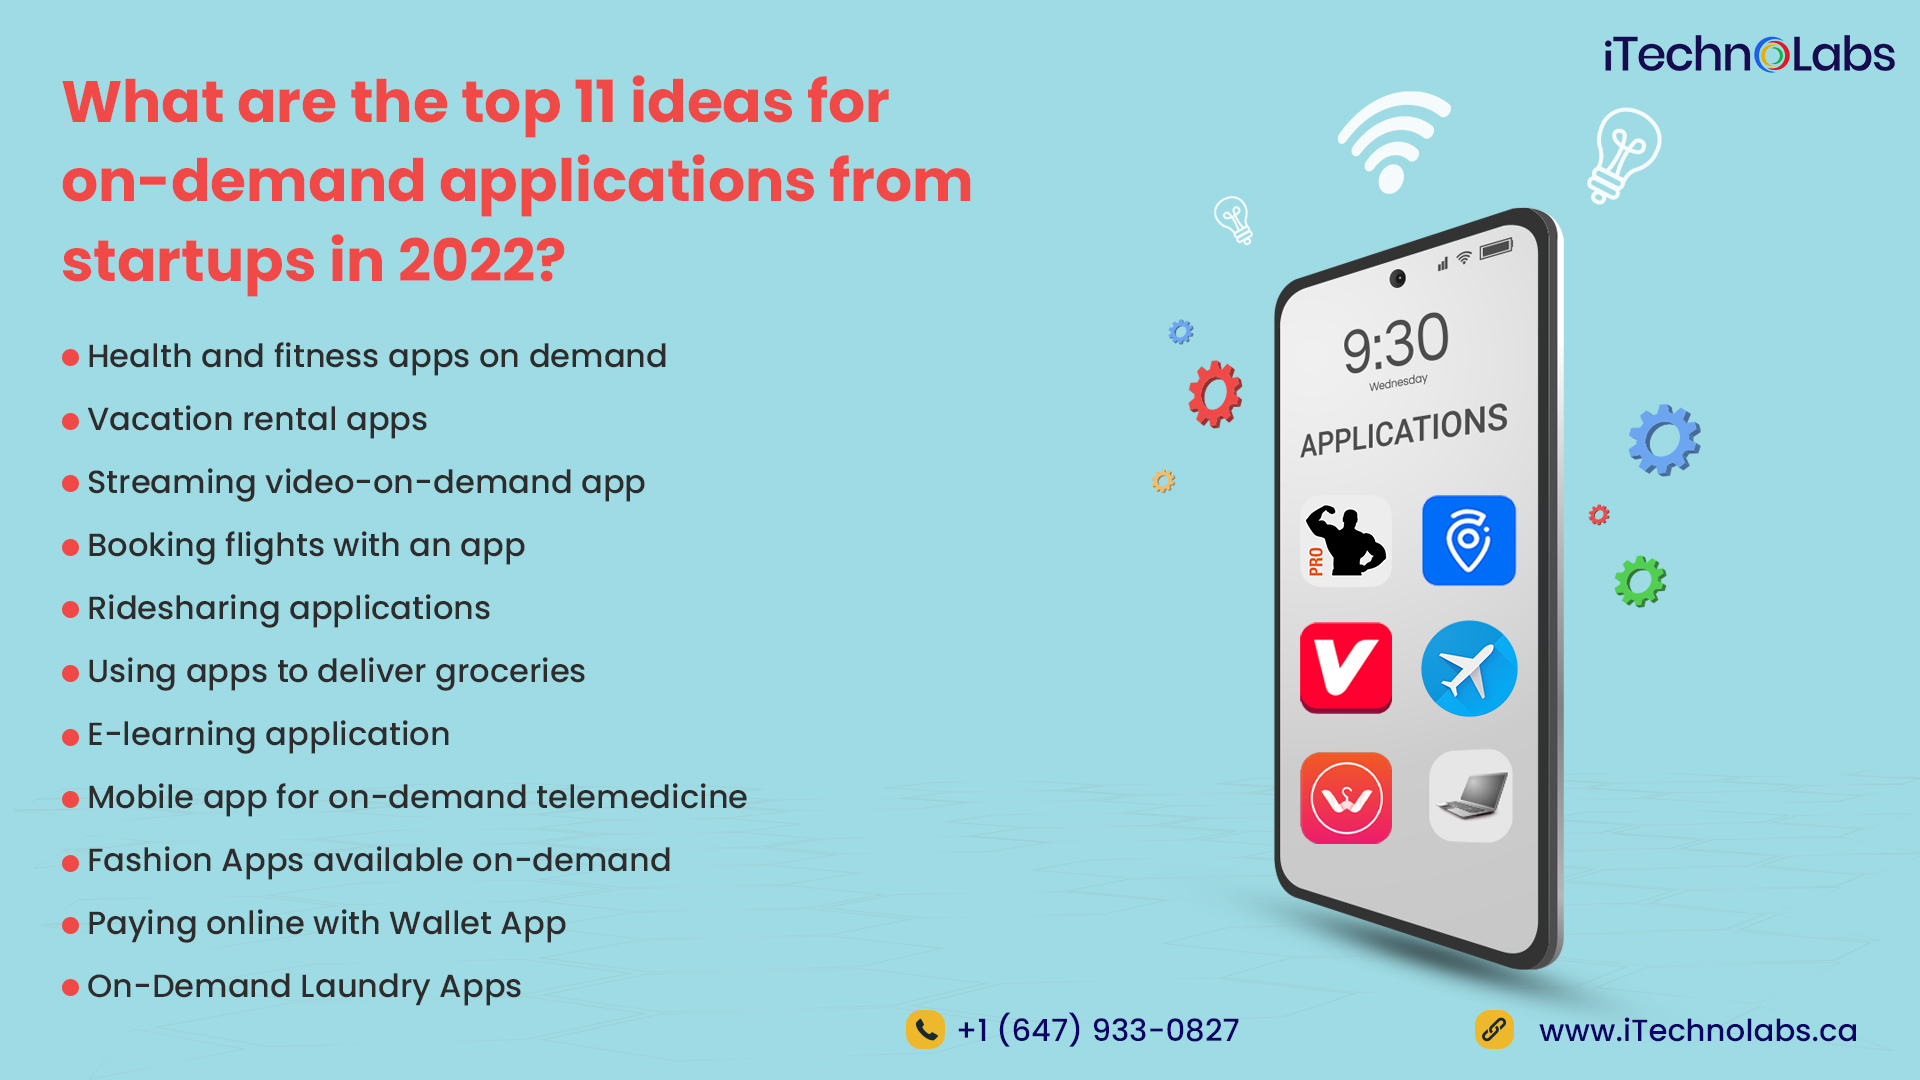  What-are-the-top-11-ideas-for-on-demand-applications-from-startups-in-2022-itechnolabs